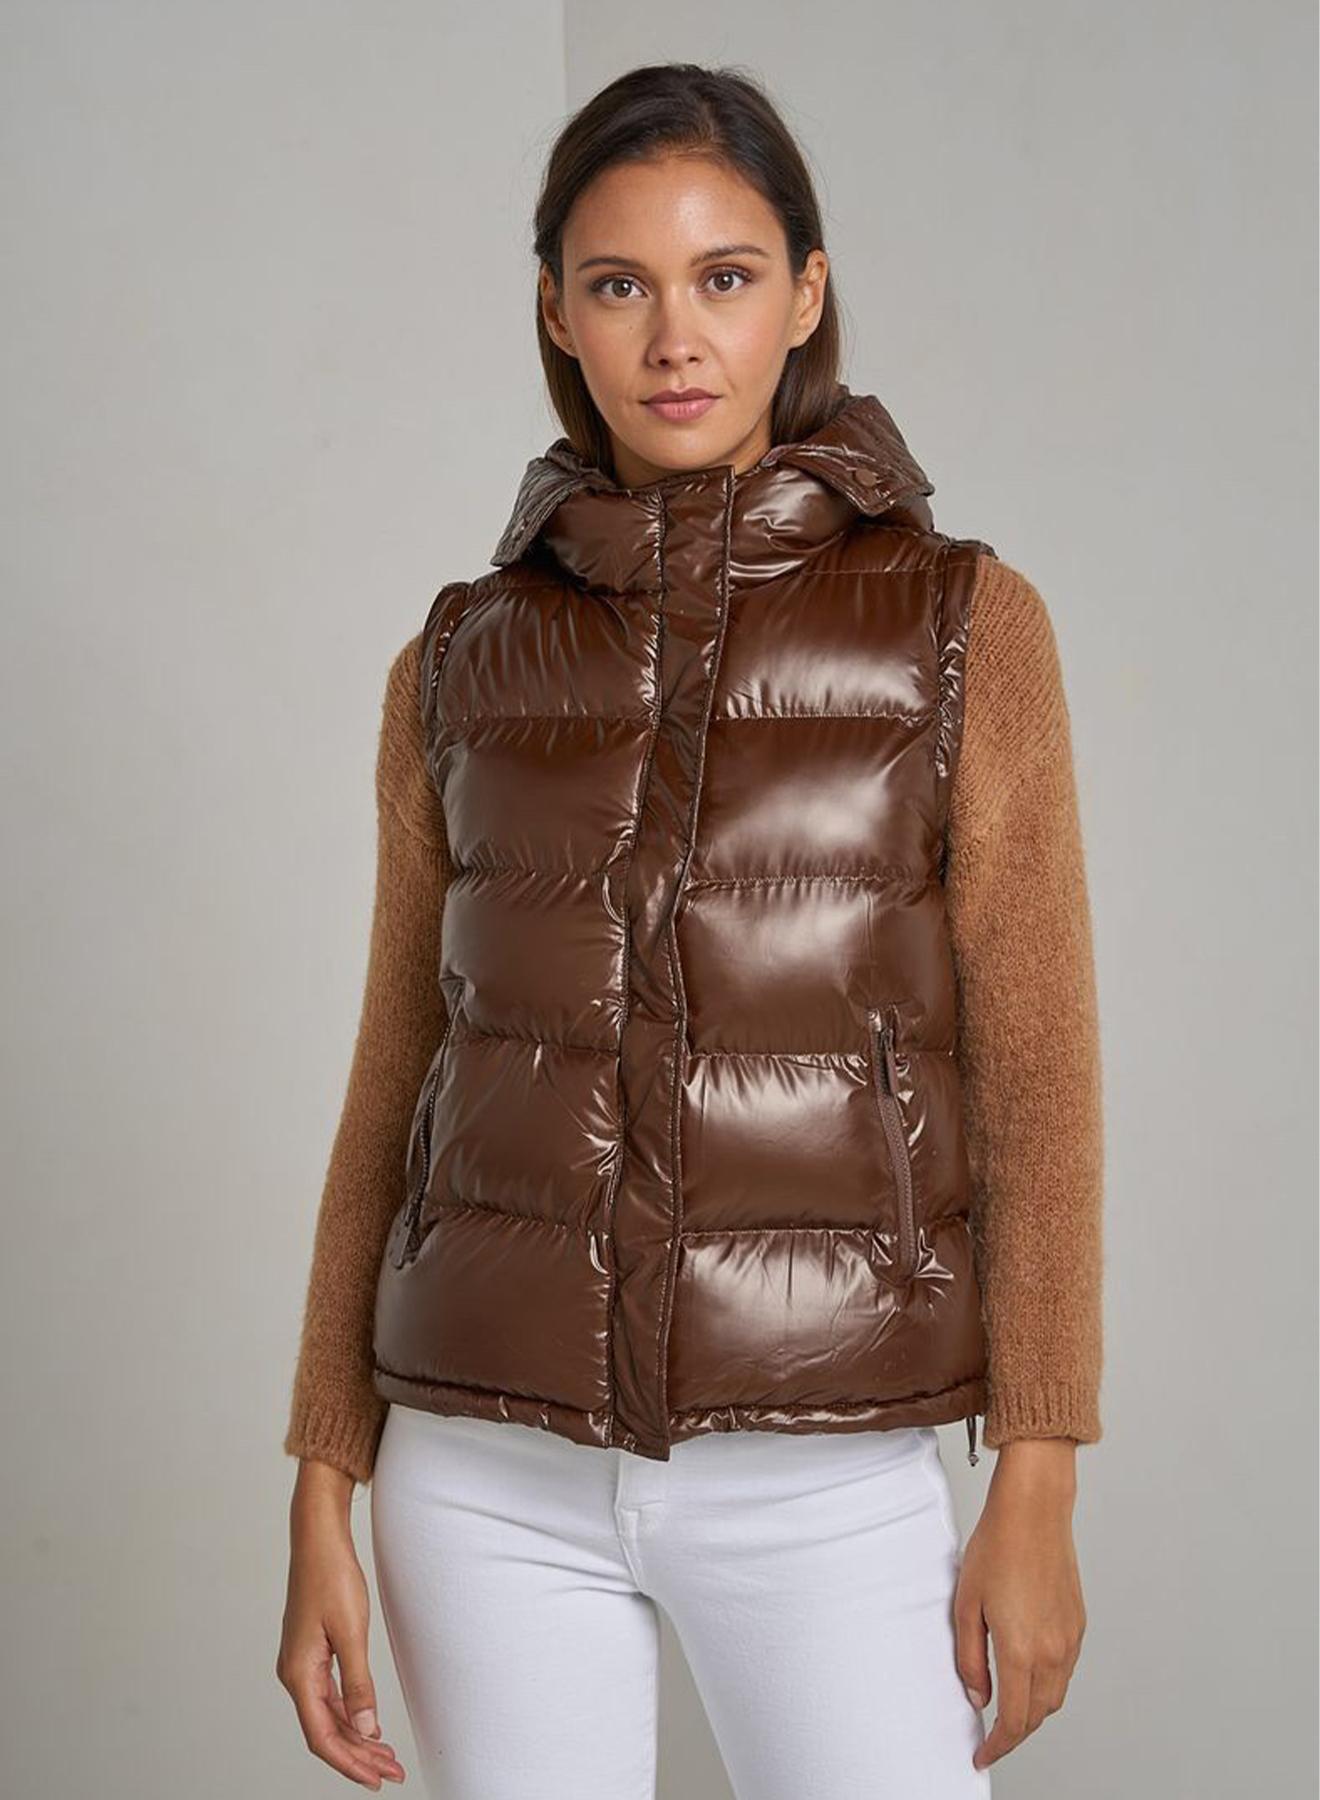 Hooded puffer jacket with removable sleeves - 3